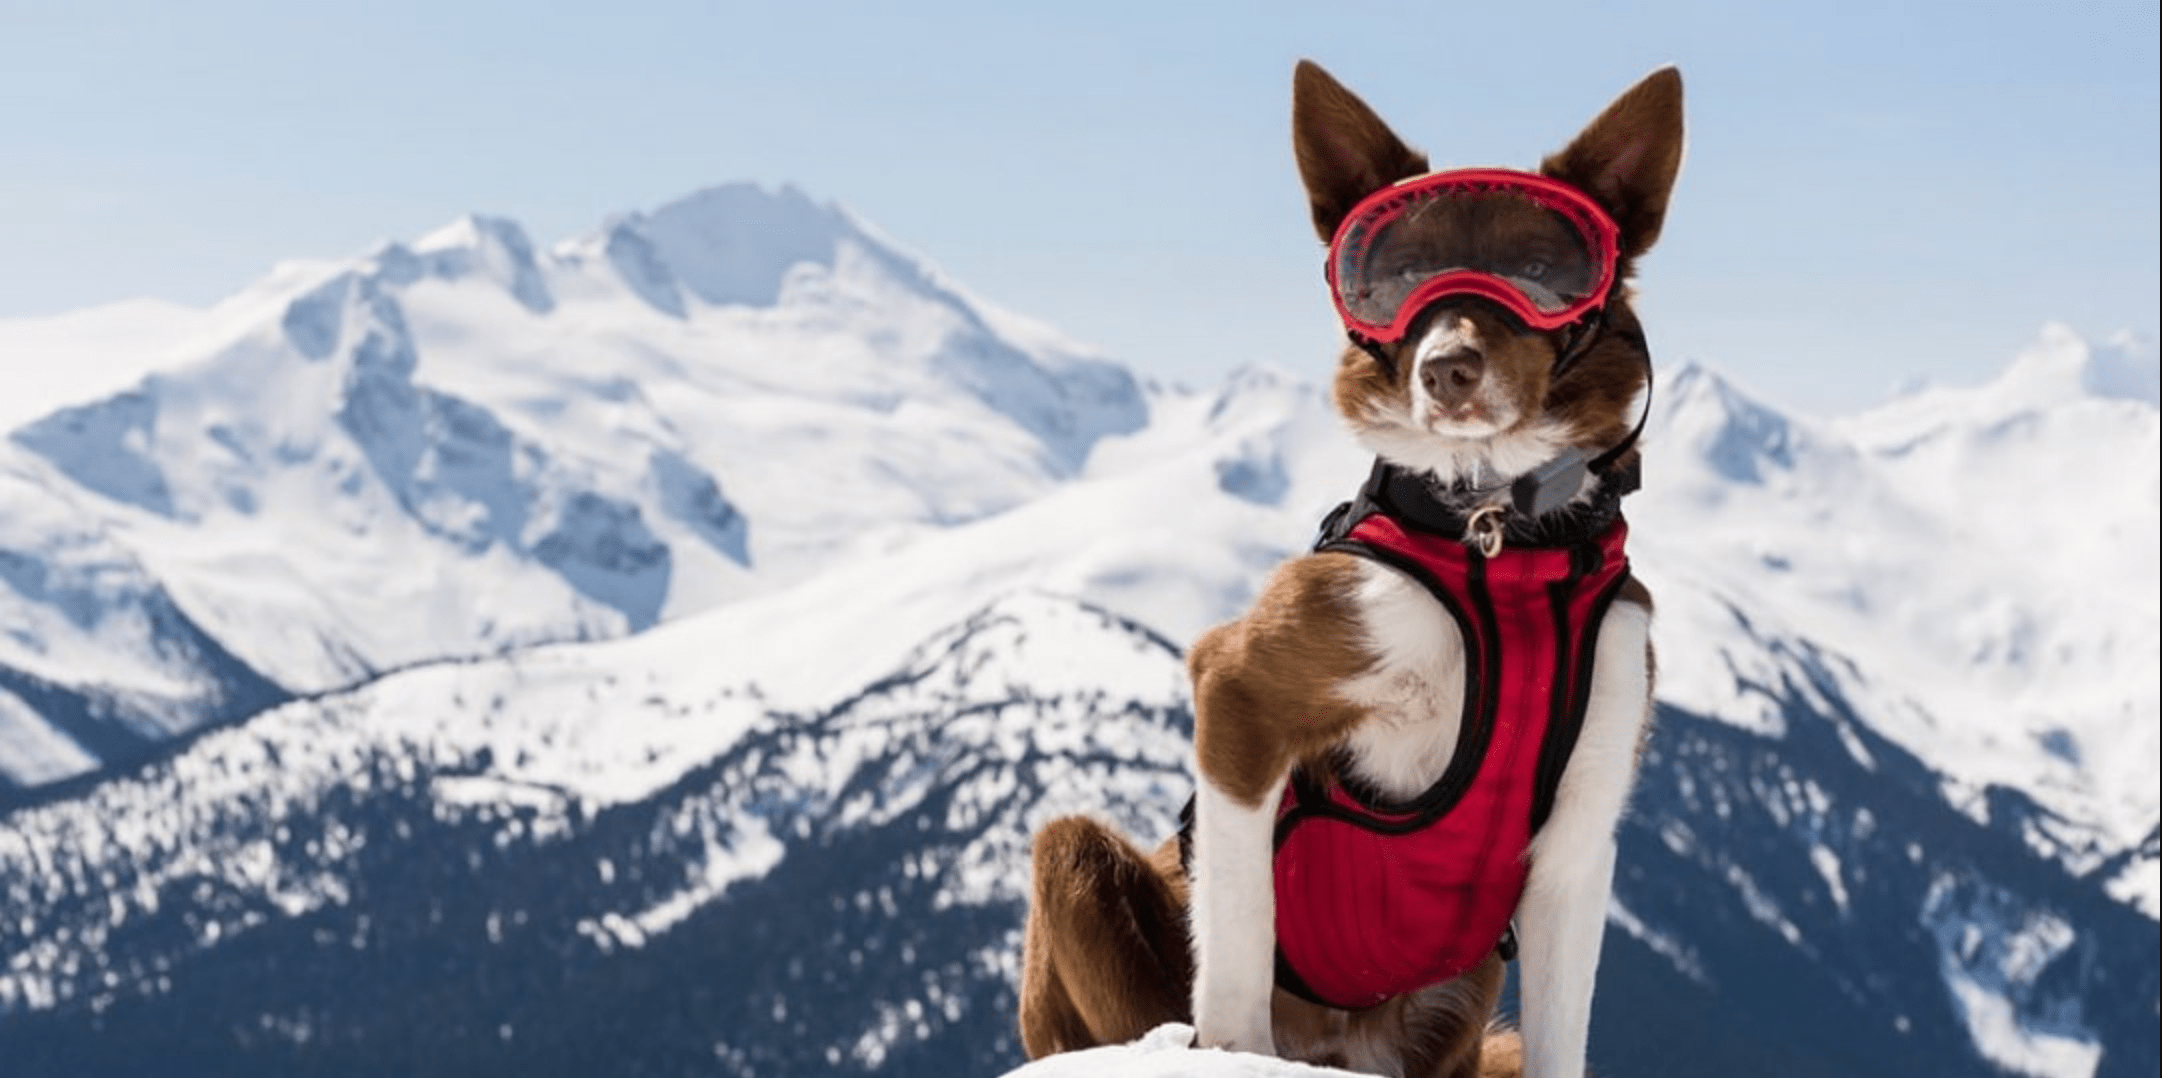 Soon you might see dogs on ski hills alongside their owners!